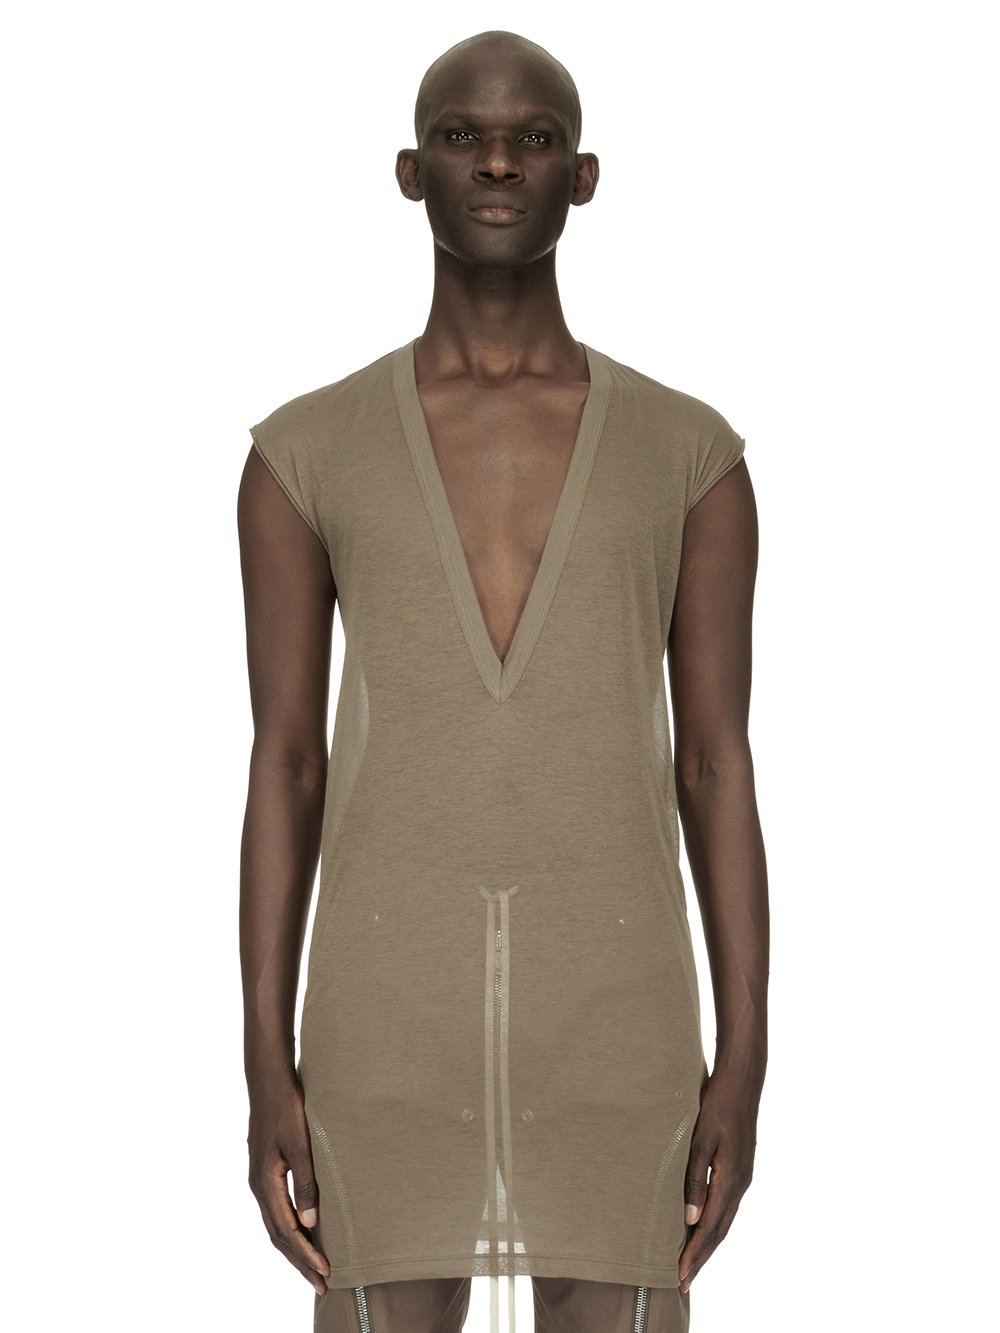 RICK OWENS FW23 LUXOR DEEP V NECK SS T IN DUST GREY UNSTABLE COTTON